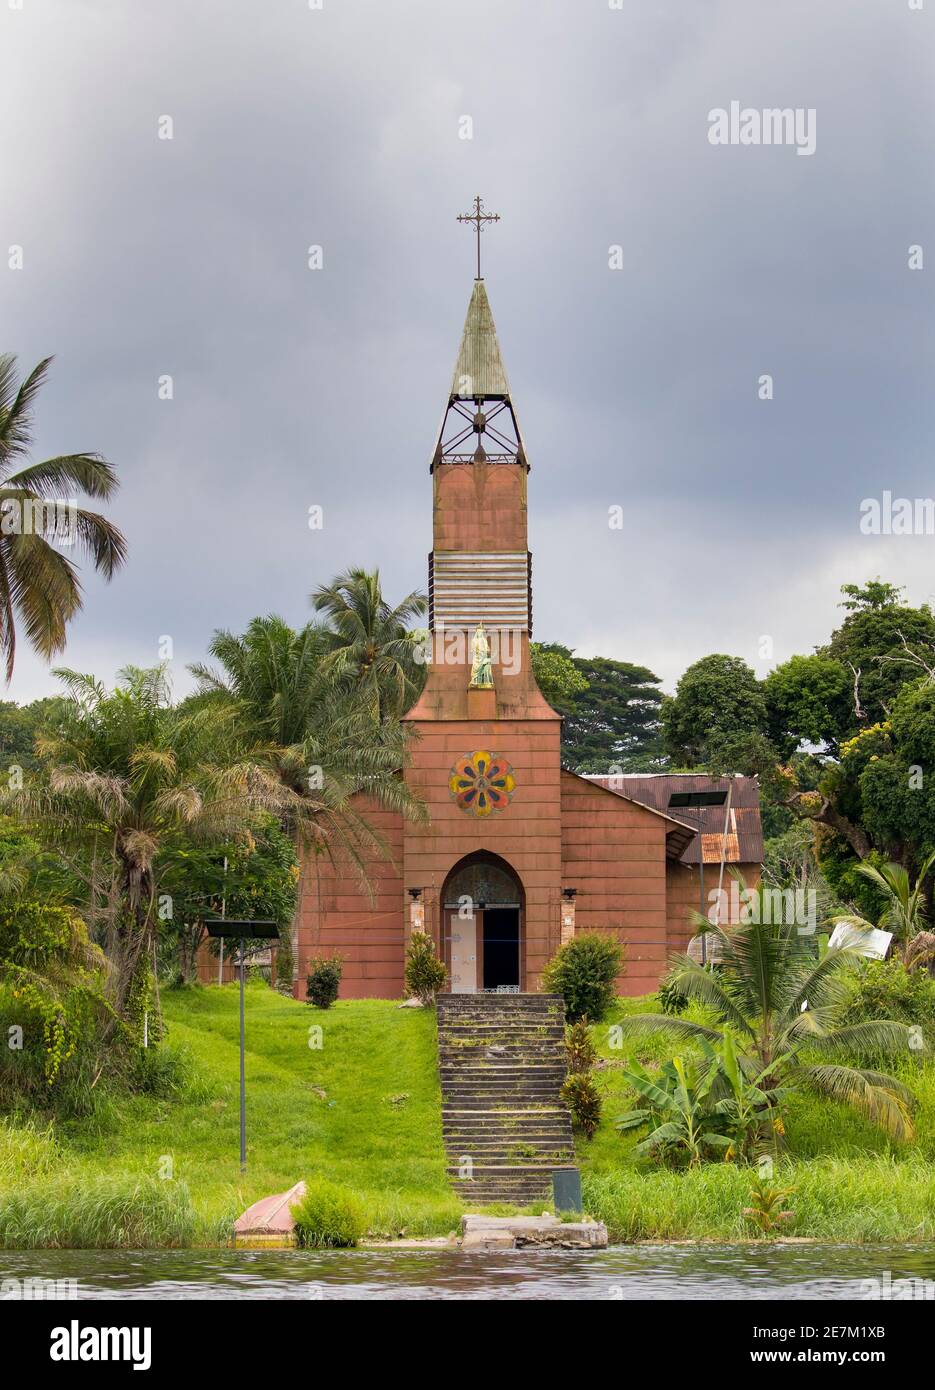 St Anne's Mission, designed and materials supplied by Gustav Eiffel in 1889, near Omboue, Fernan Vaz Lagoon, Gabon, central Africa. Stock Photo